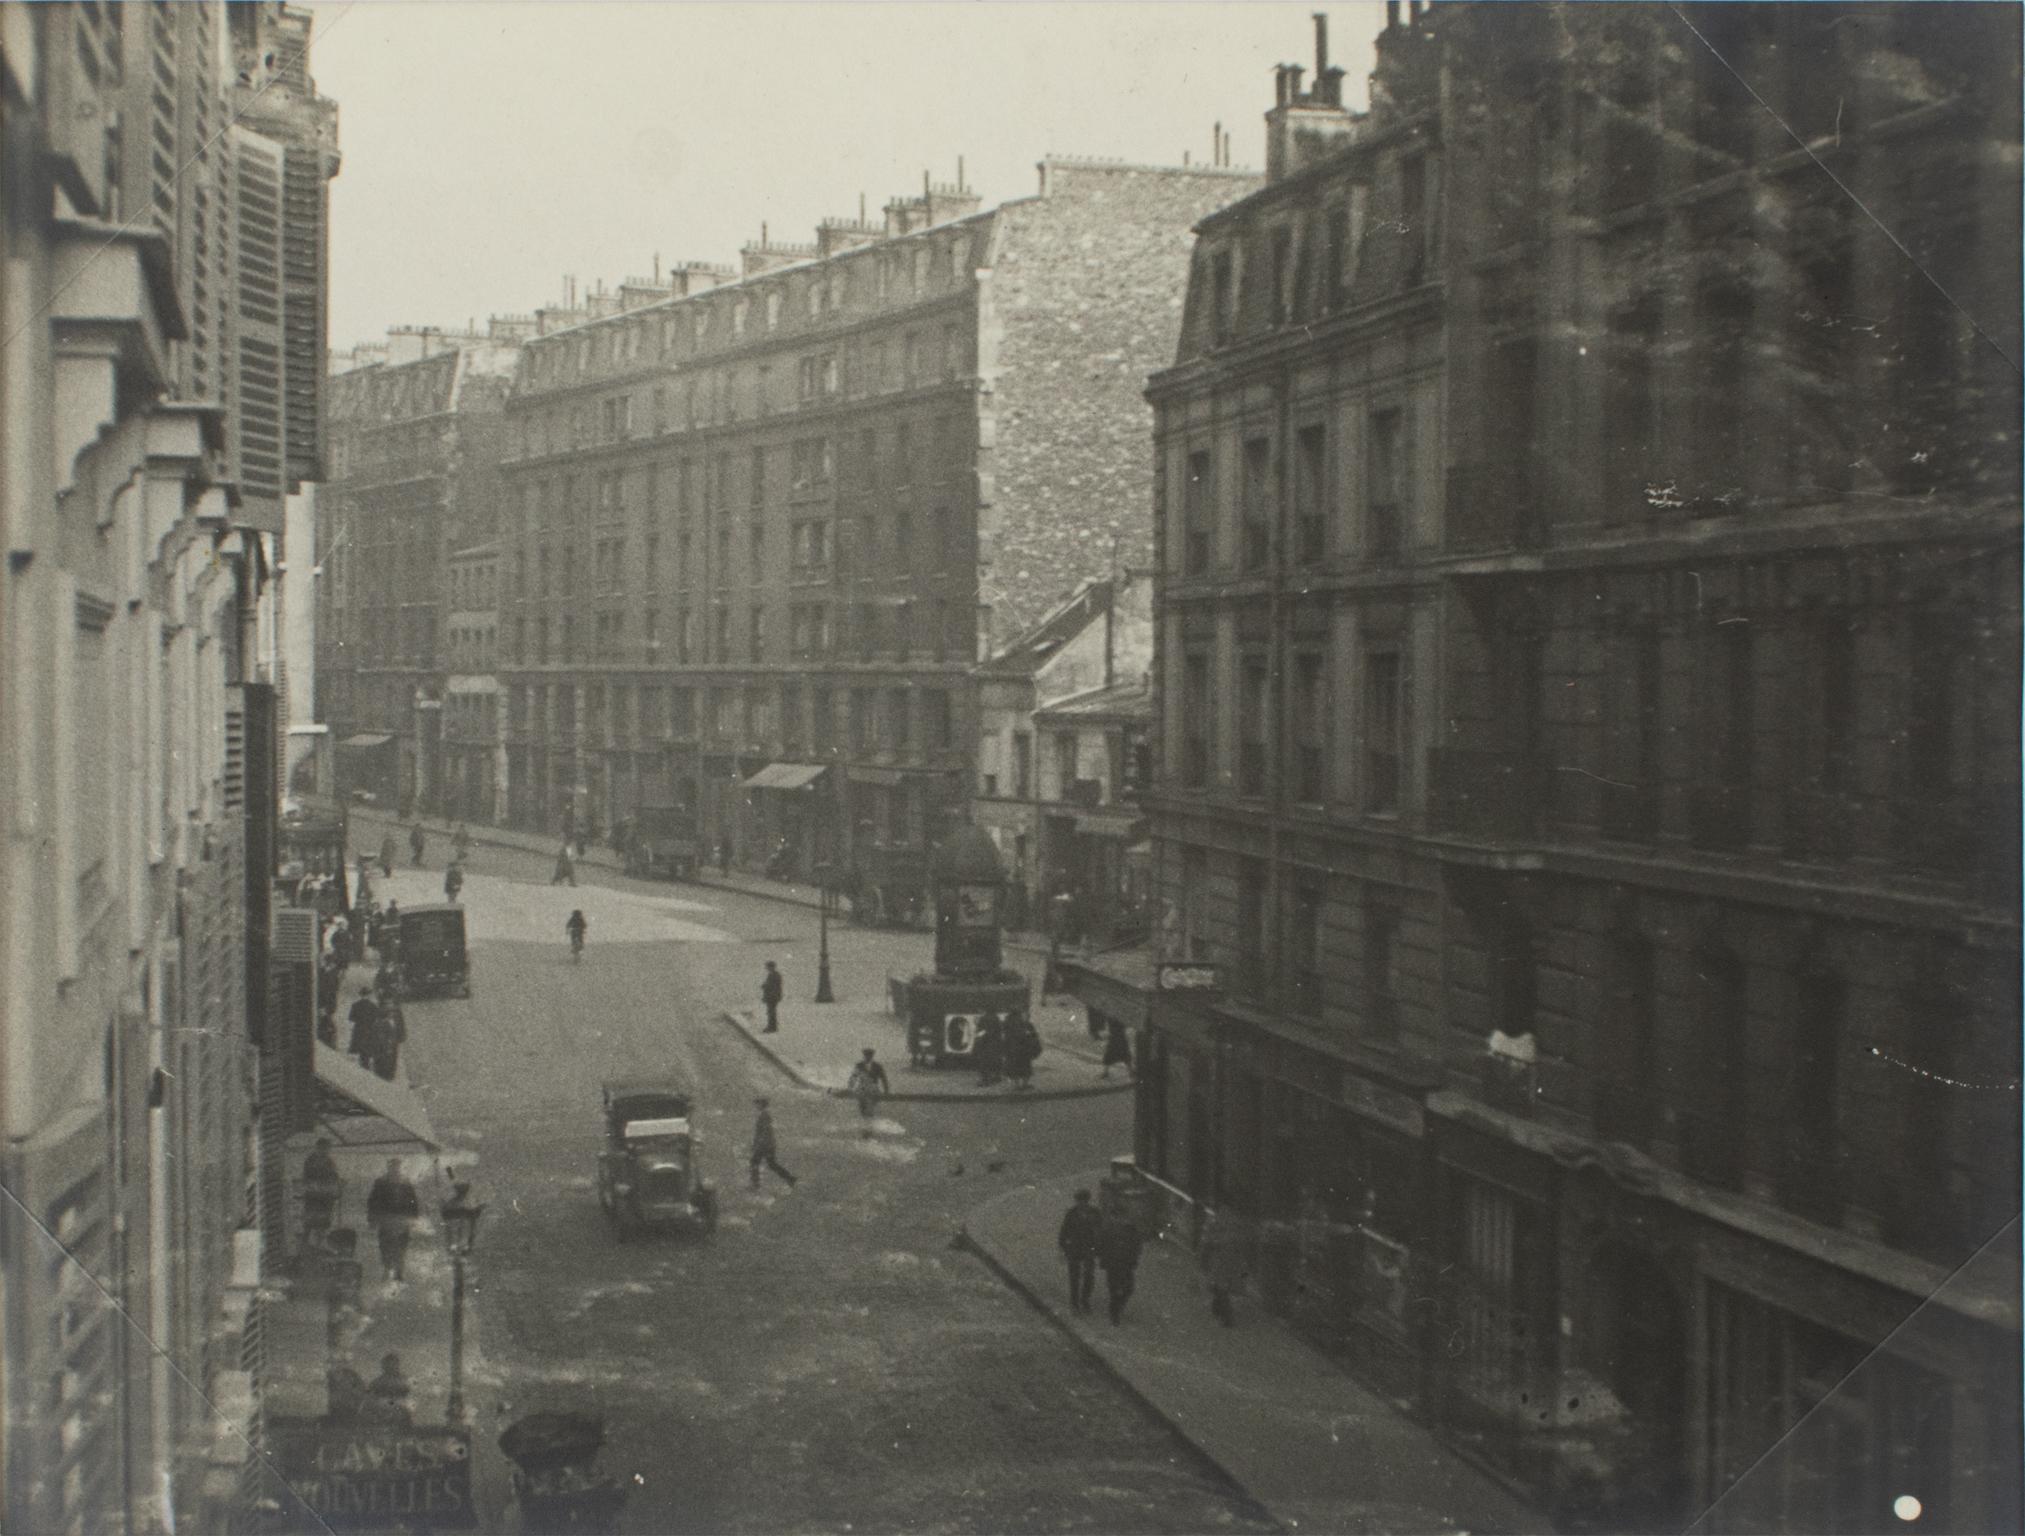 Unknown Landscape Photograph - Street View in Paris, 1930s, Silver Gelatin Black and White Photography